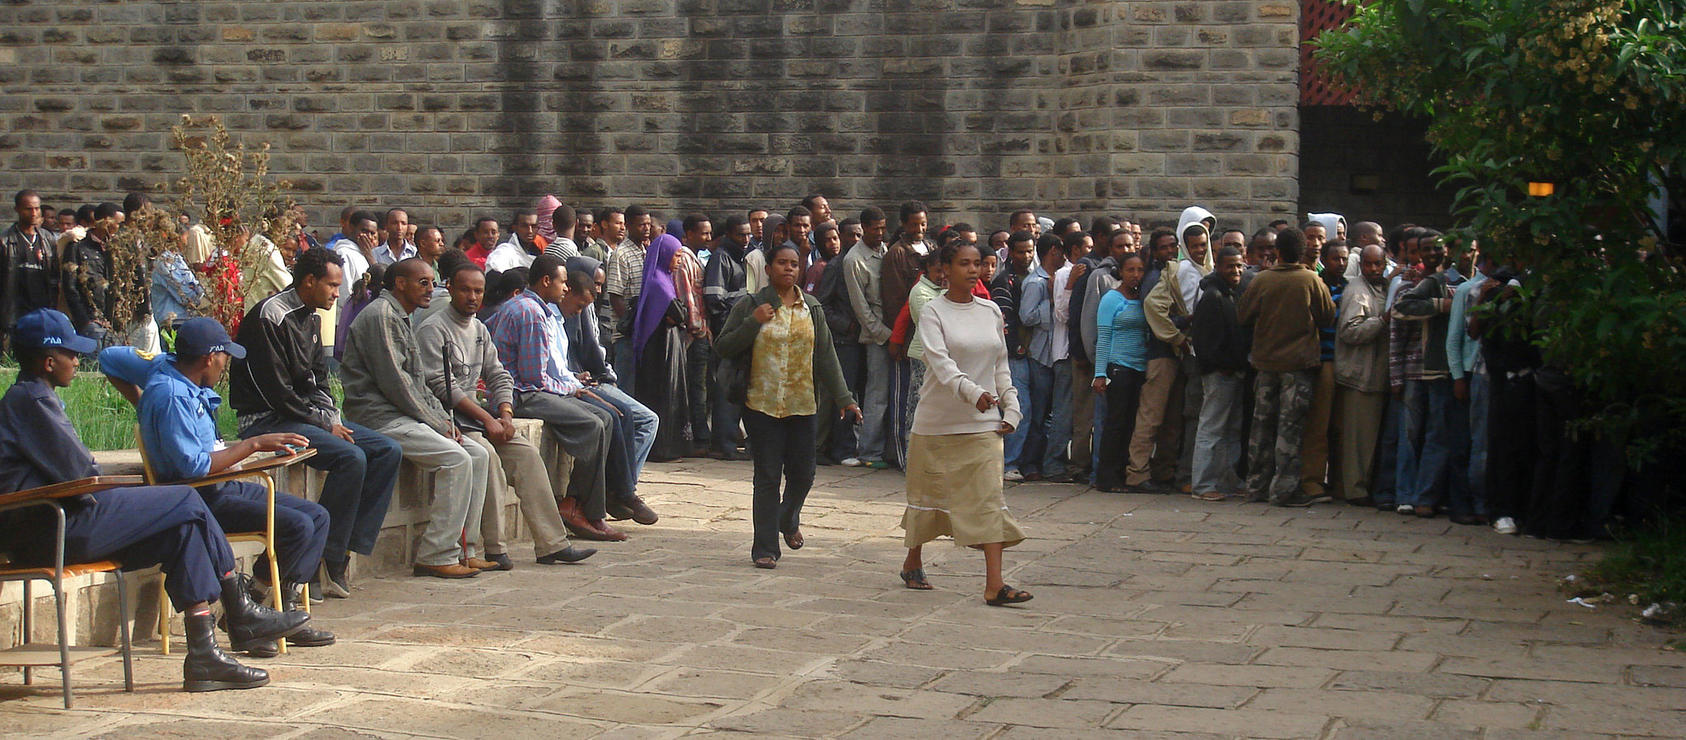 Ethiopian voters in Addis Ababa, the capital city, wait in line to vote during 2010 general elections. (Uduak Amimo)